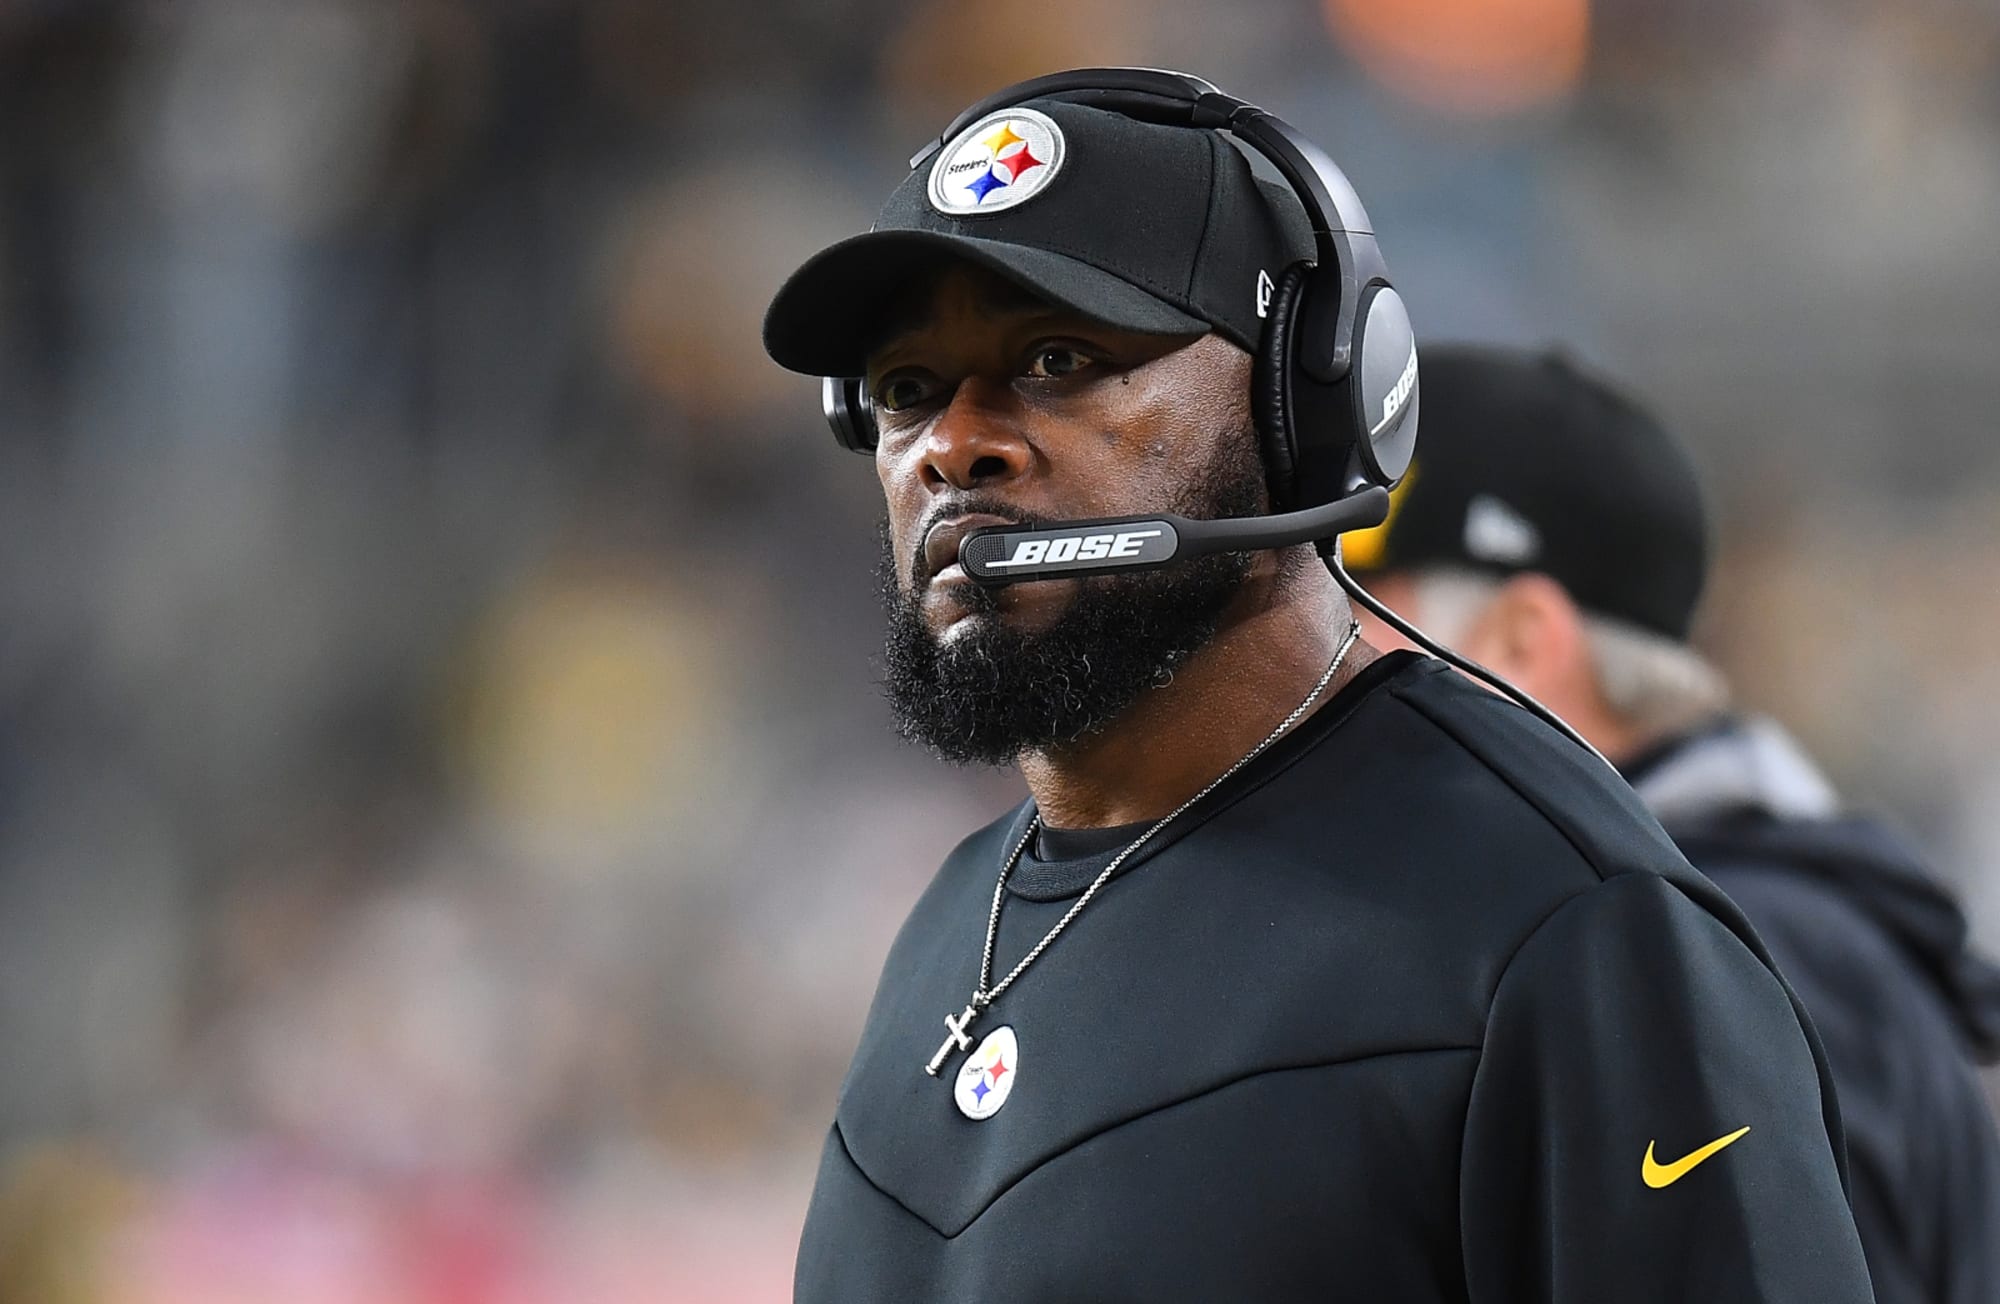 Steelers focusing in on finalists for their open GM job